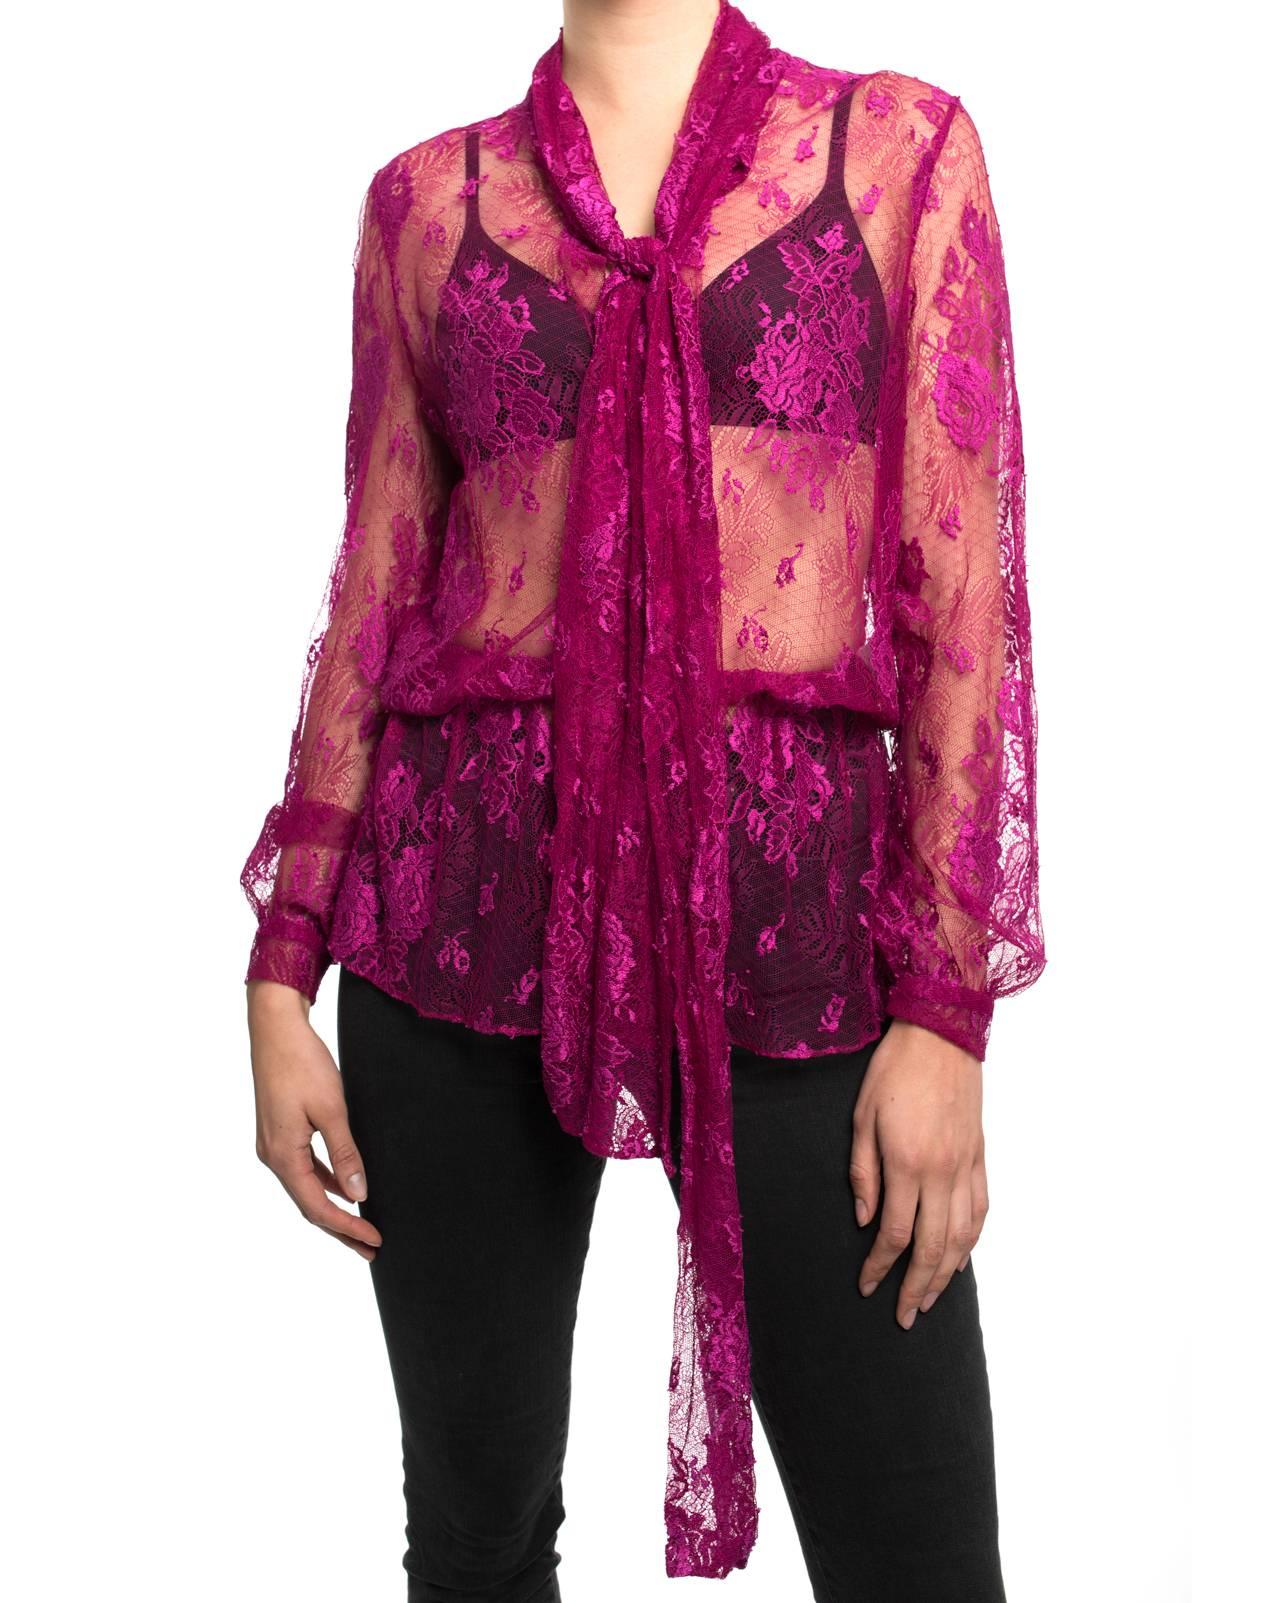 Balenciaga Pre-fall 2017 Runway fuchsia lace blouse.   Pussy bow neck, covered buttons down centre front and at cuffs, oversized blouson style fit.  Fully sheer garment shown pictured with bra. Marked size FR38 (USA 6).  Measures 40” at bust and is